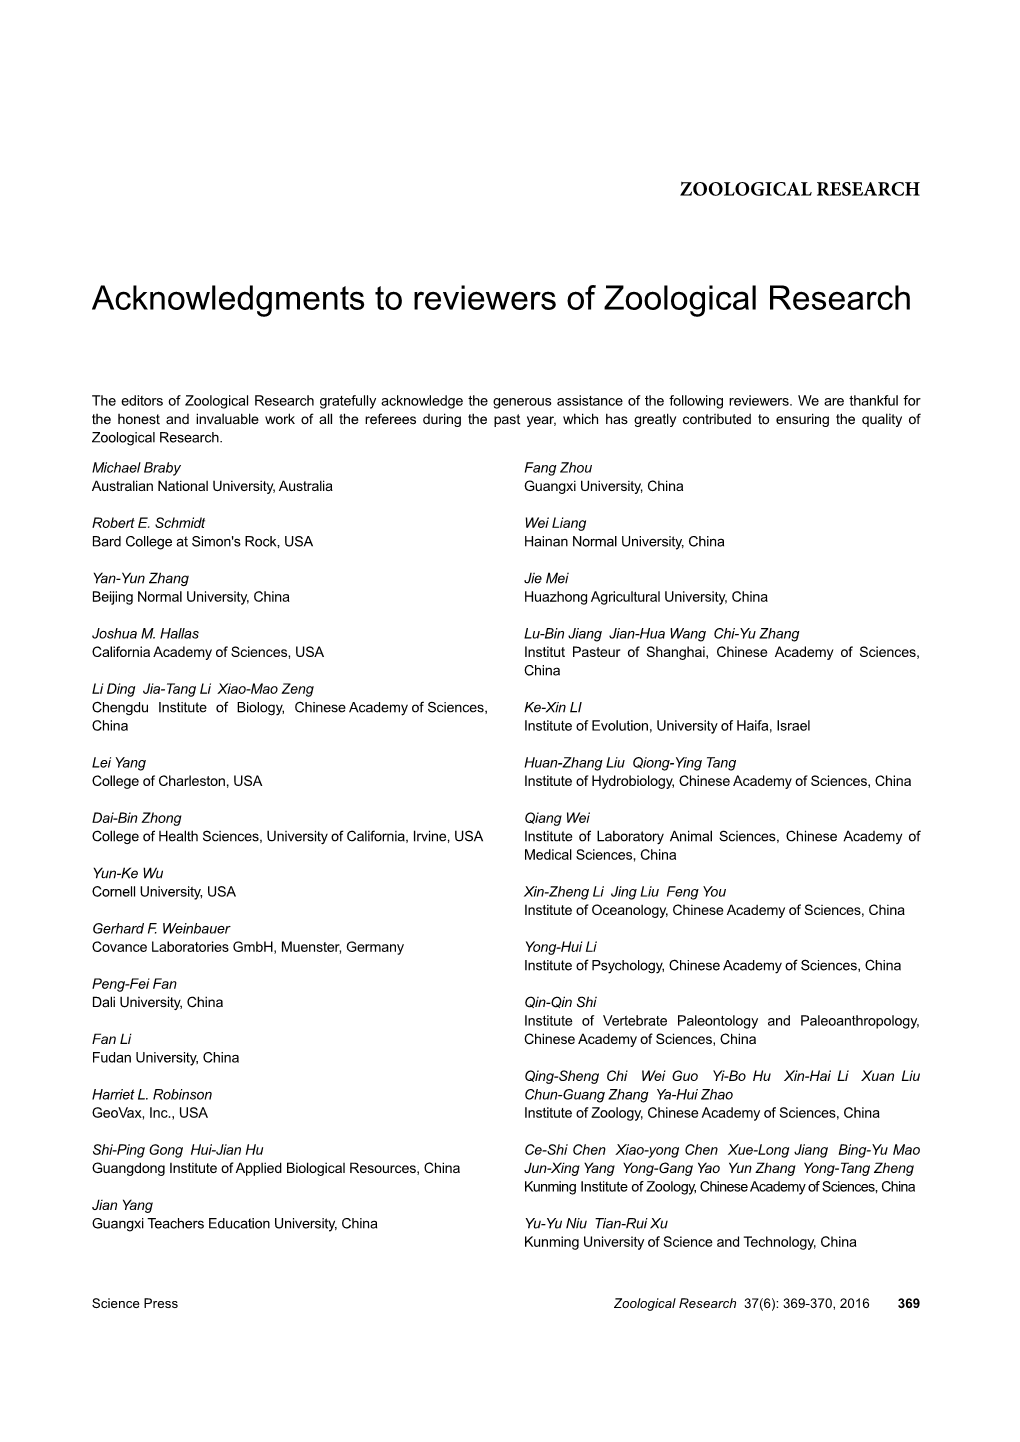 Acknowledgments to Reviewers of Zoological Research